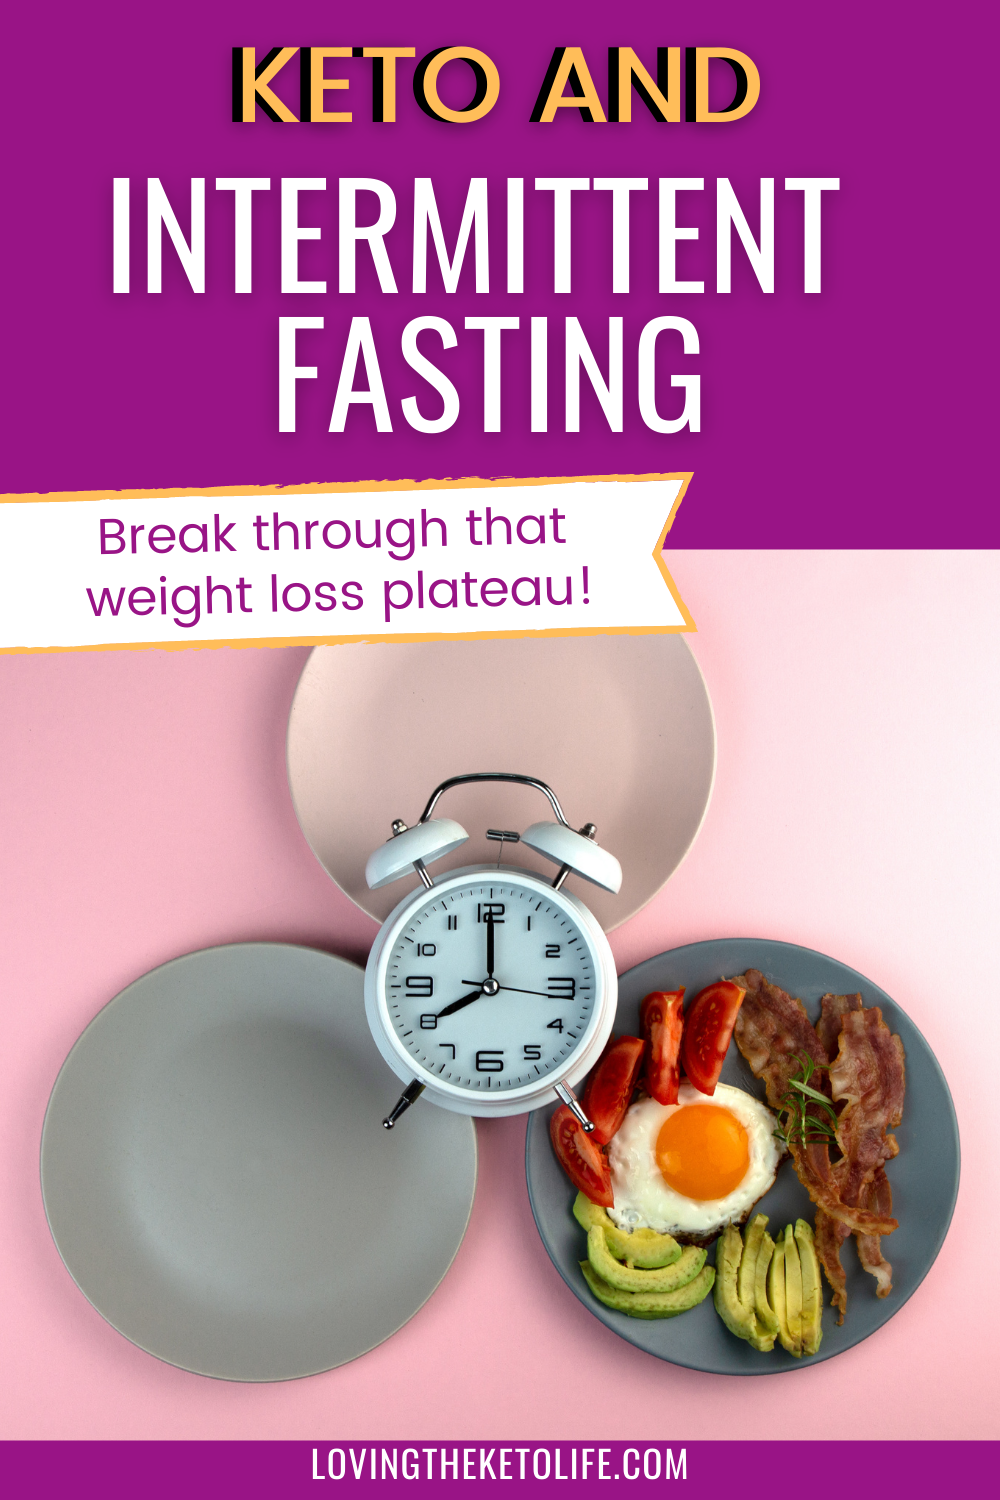 Keto and Intermittent Fasting